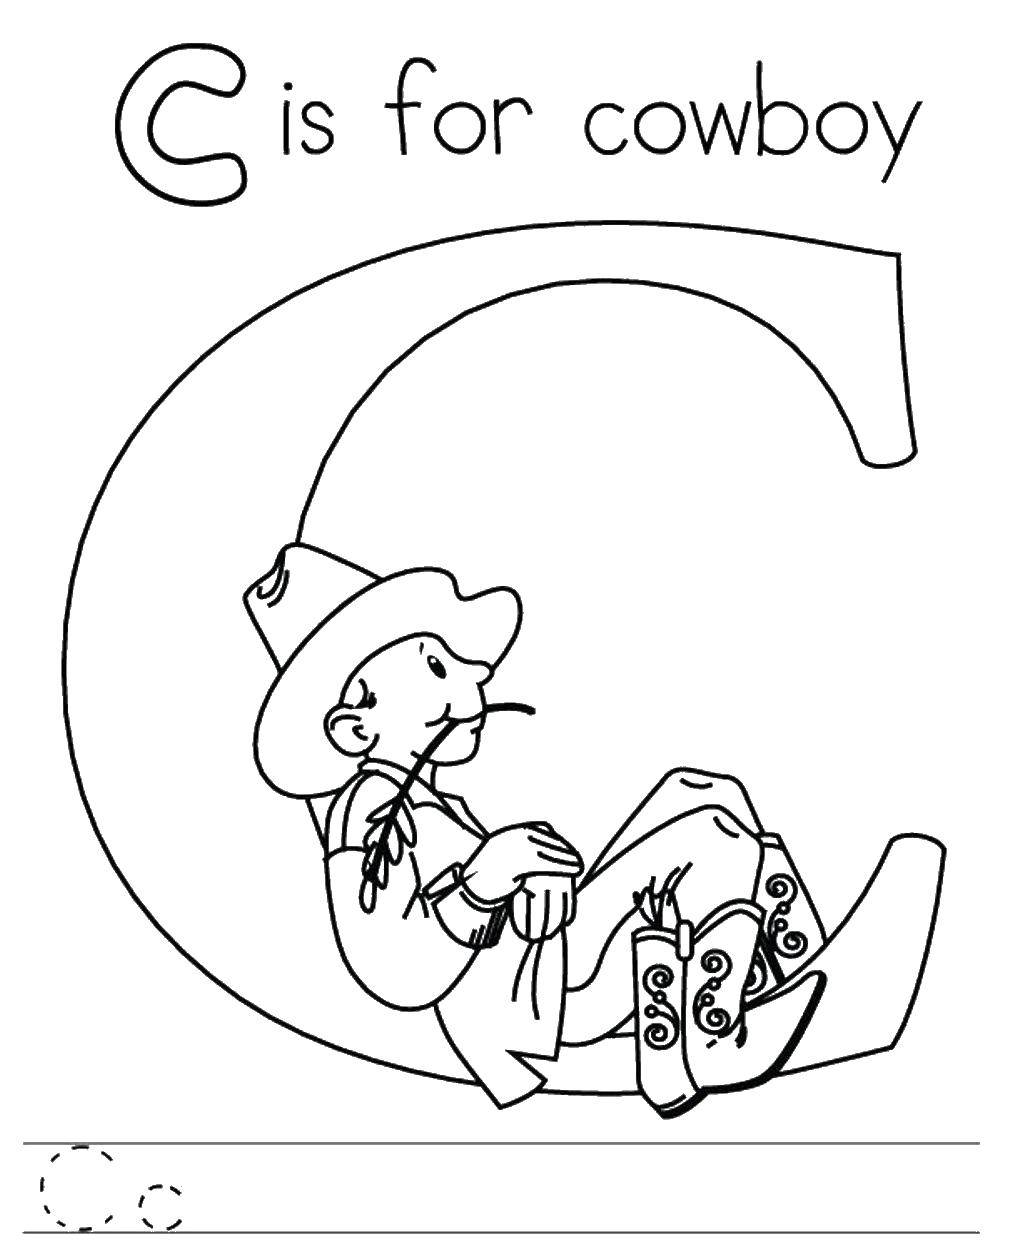 Coloring It means cowboy. Category coloring. Tags:  Cowboy.